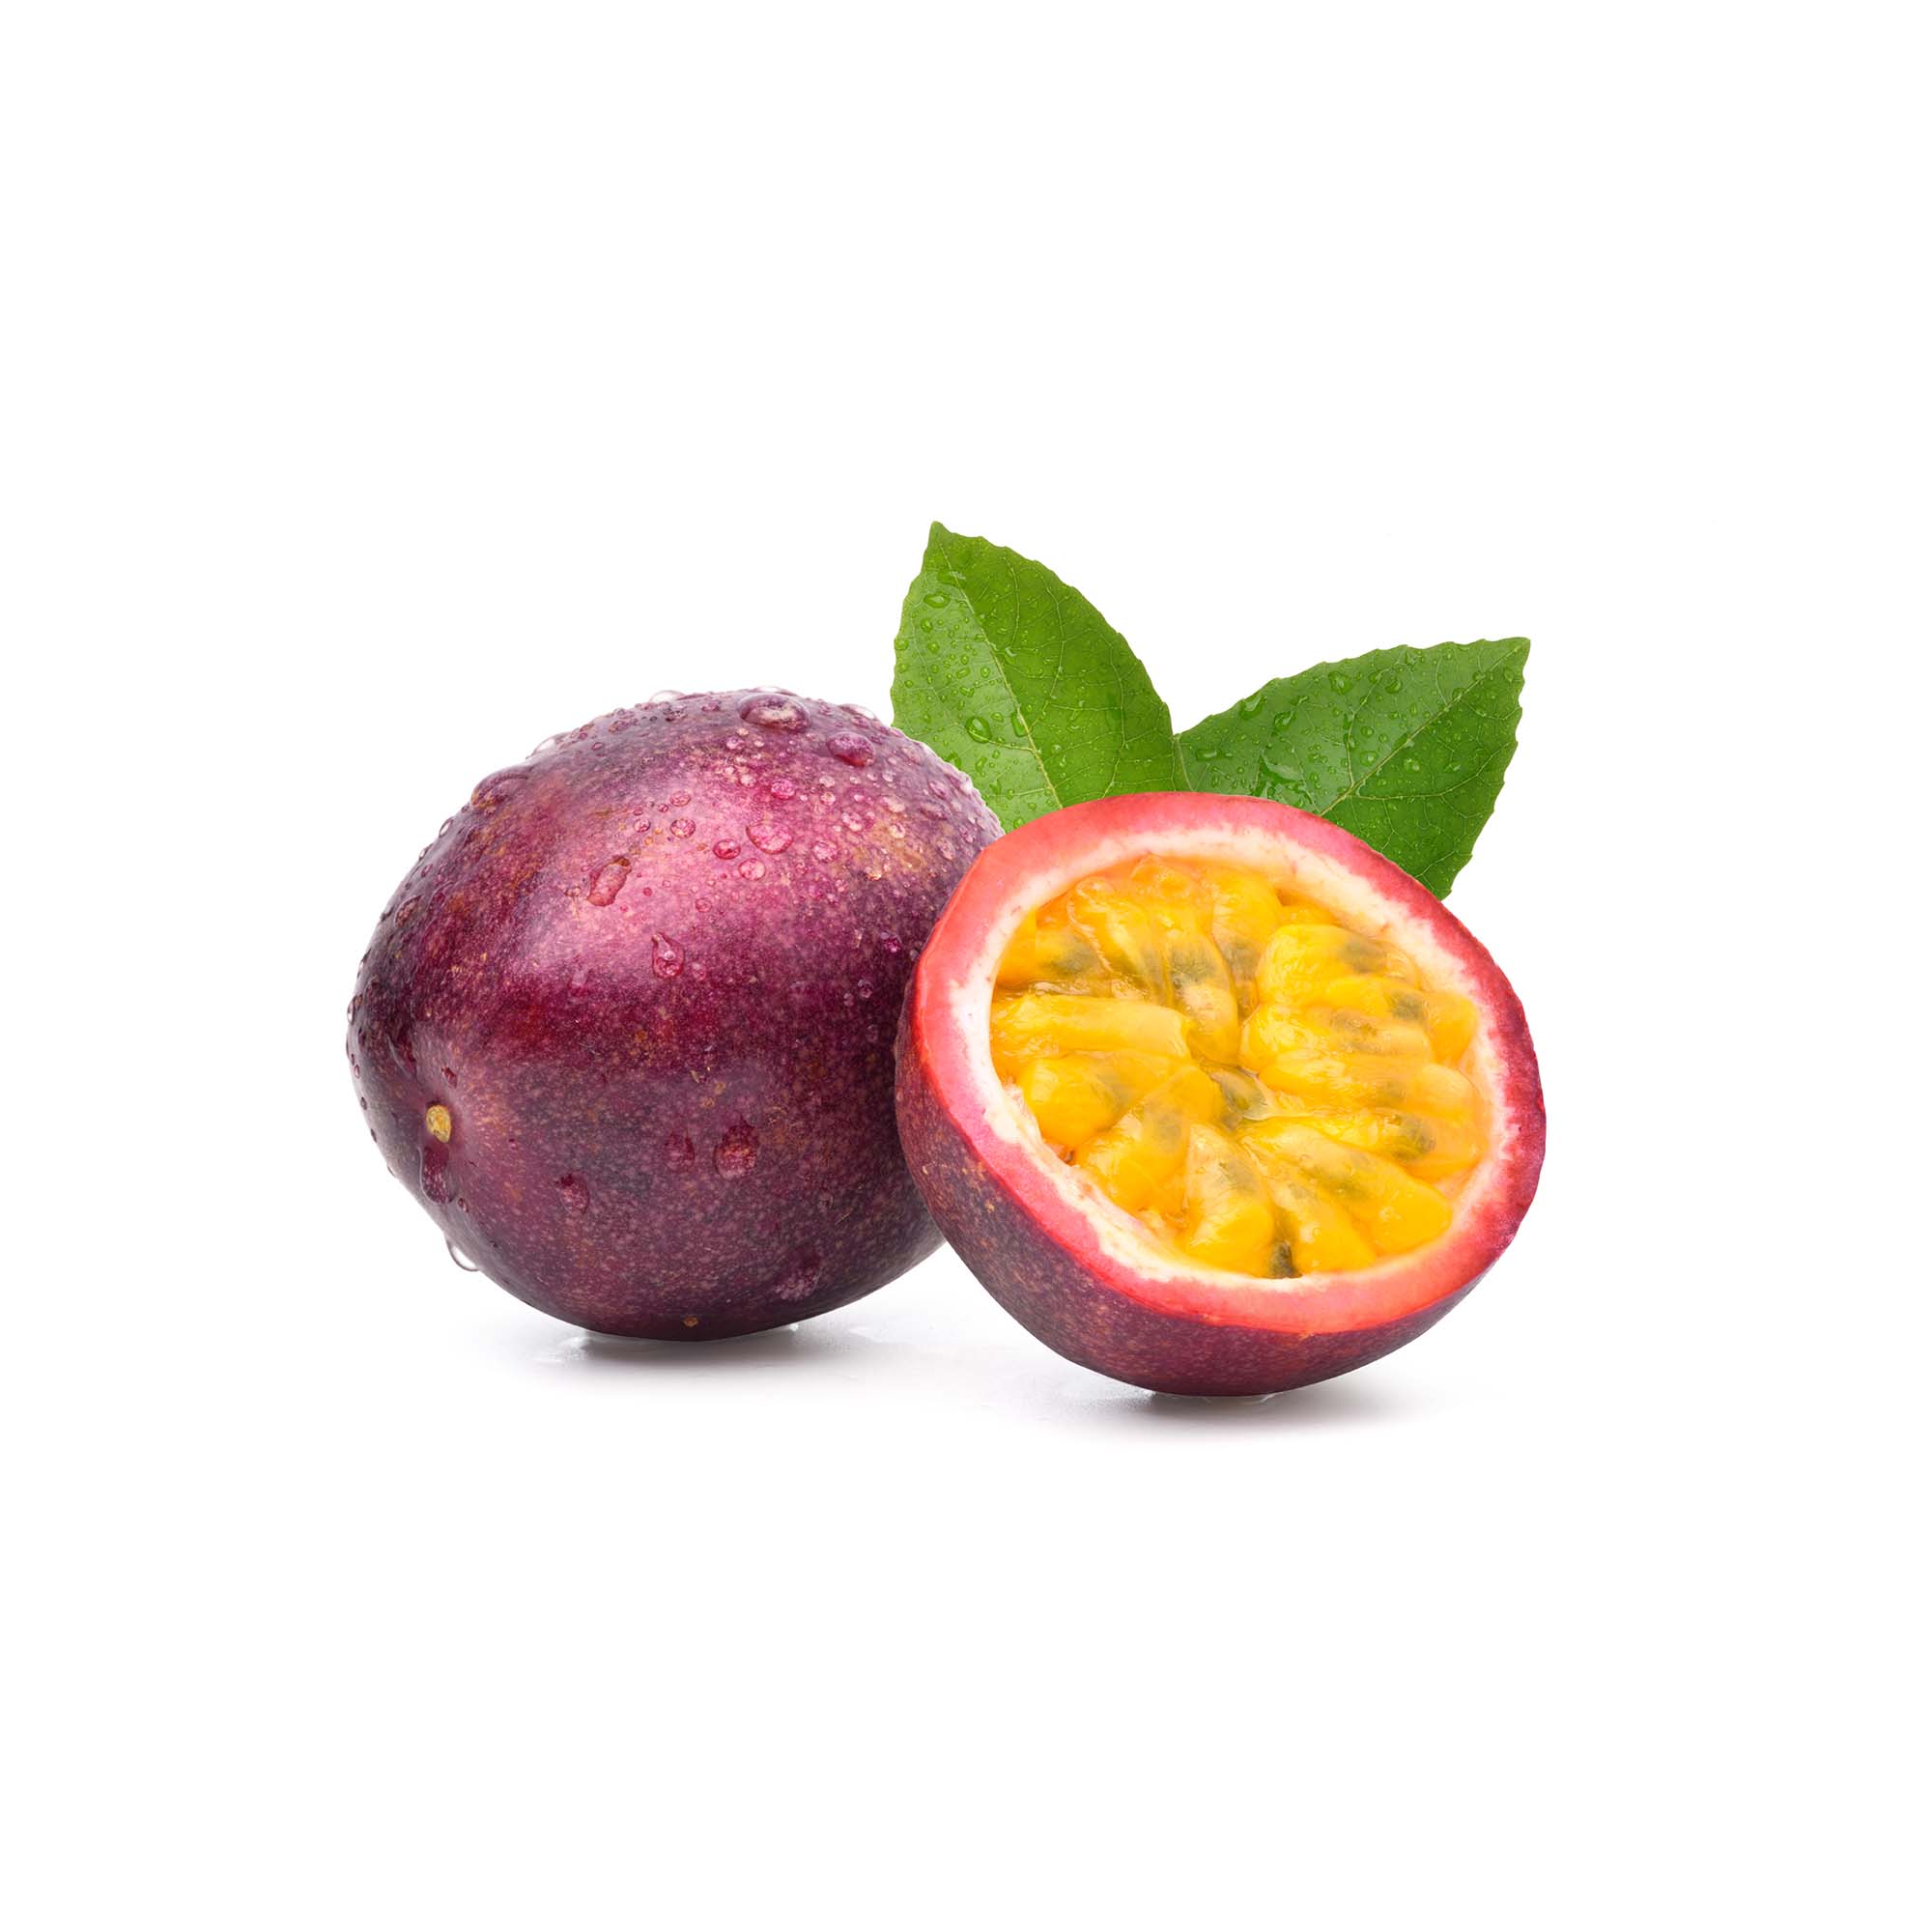 Buy Passion Fruit For Sale Online Now - Rare Exotic Fruit UK